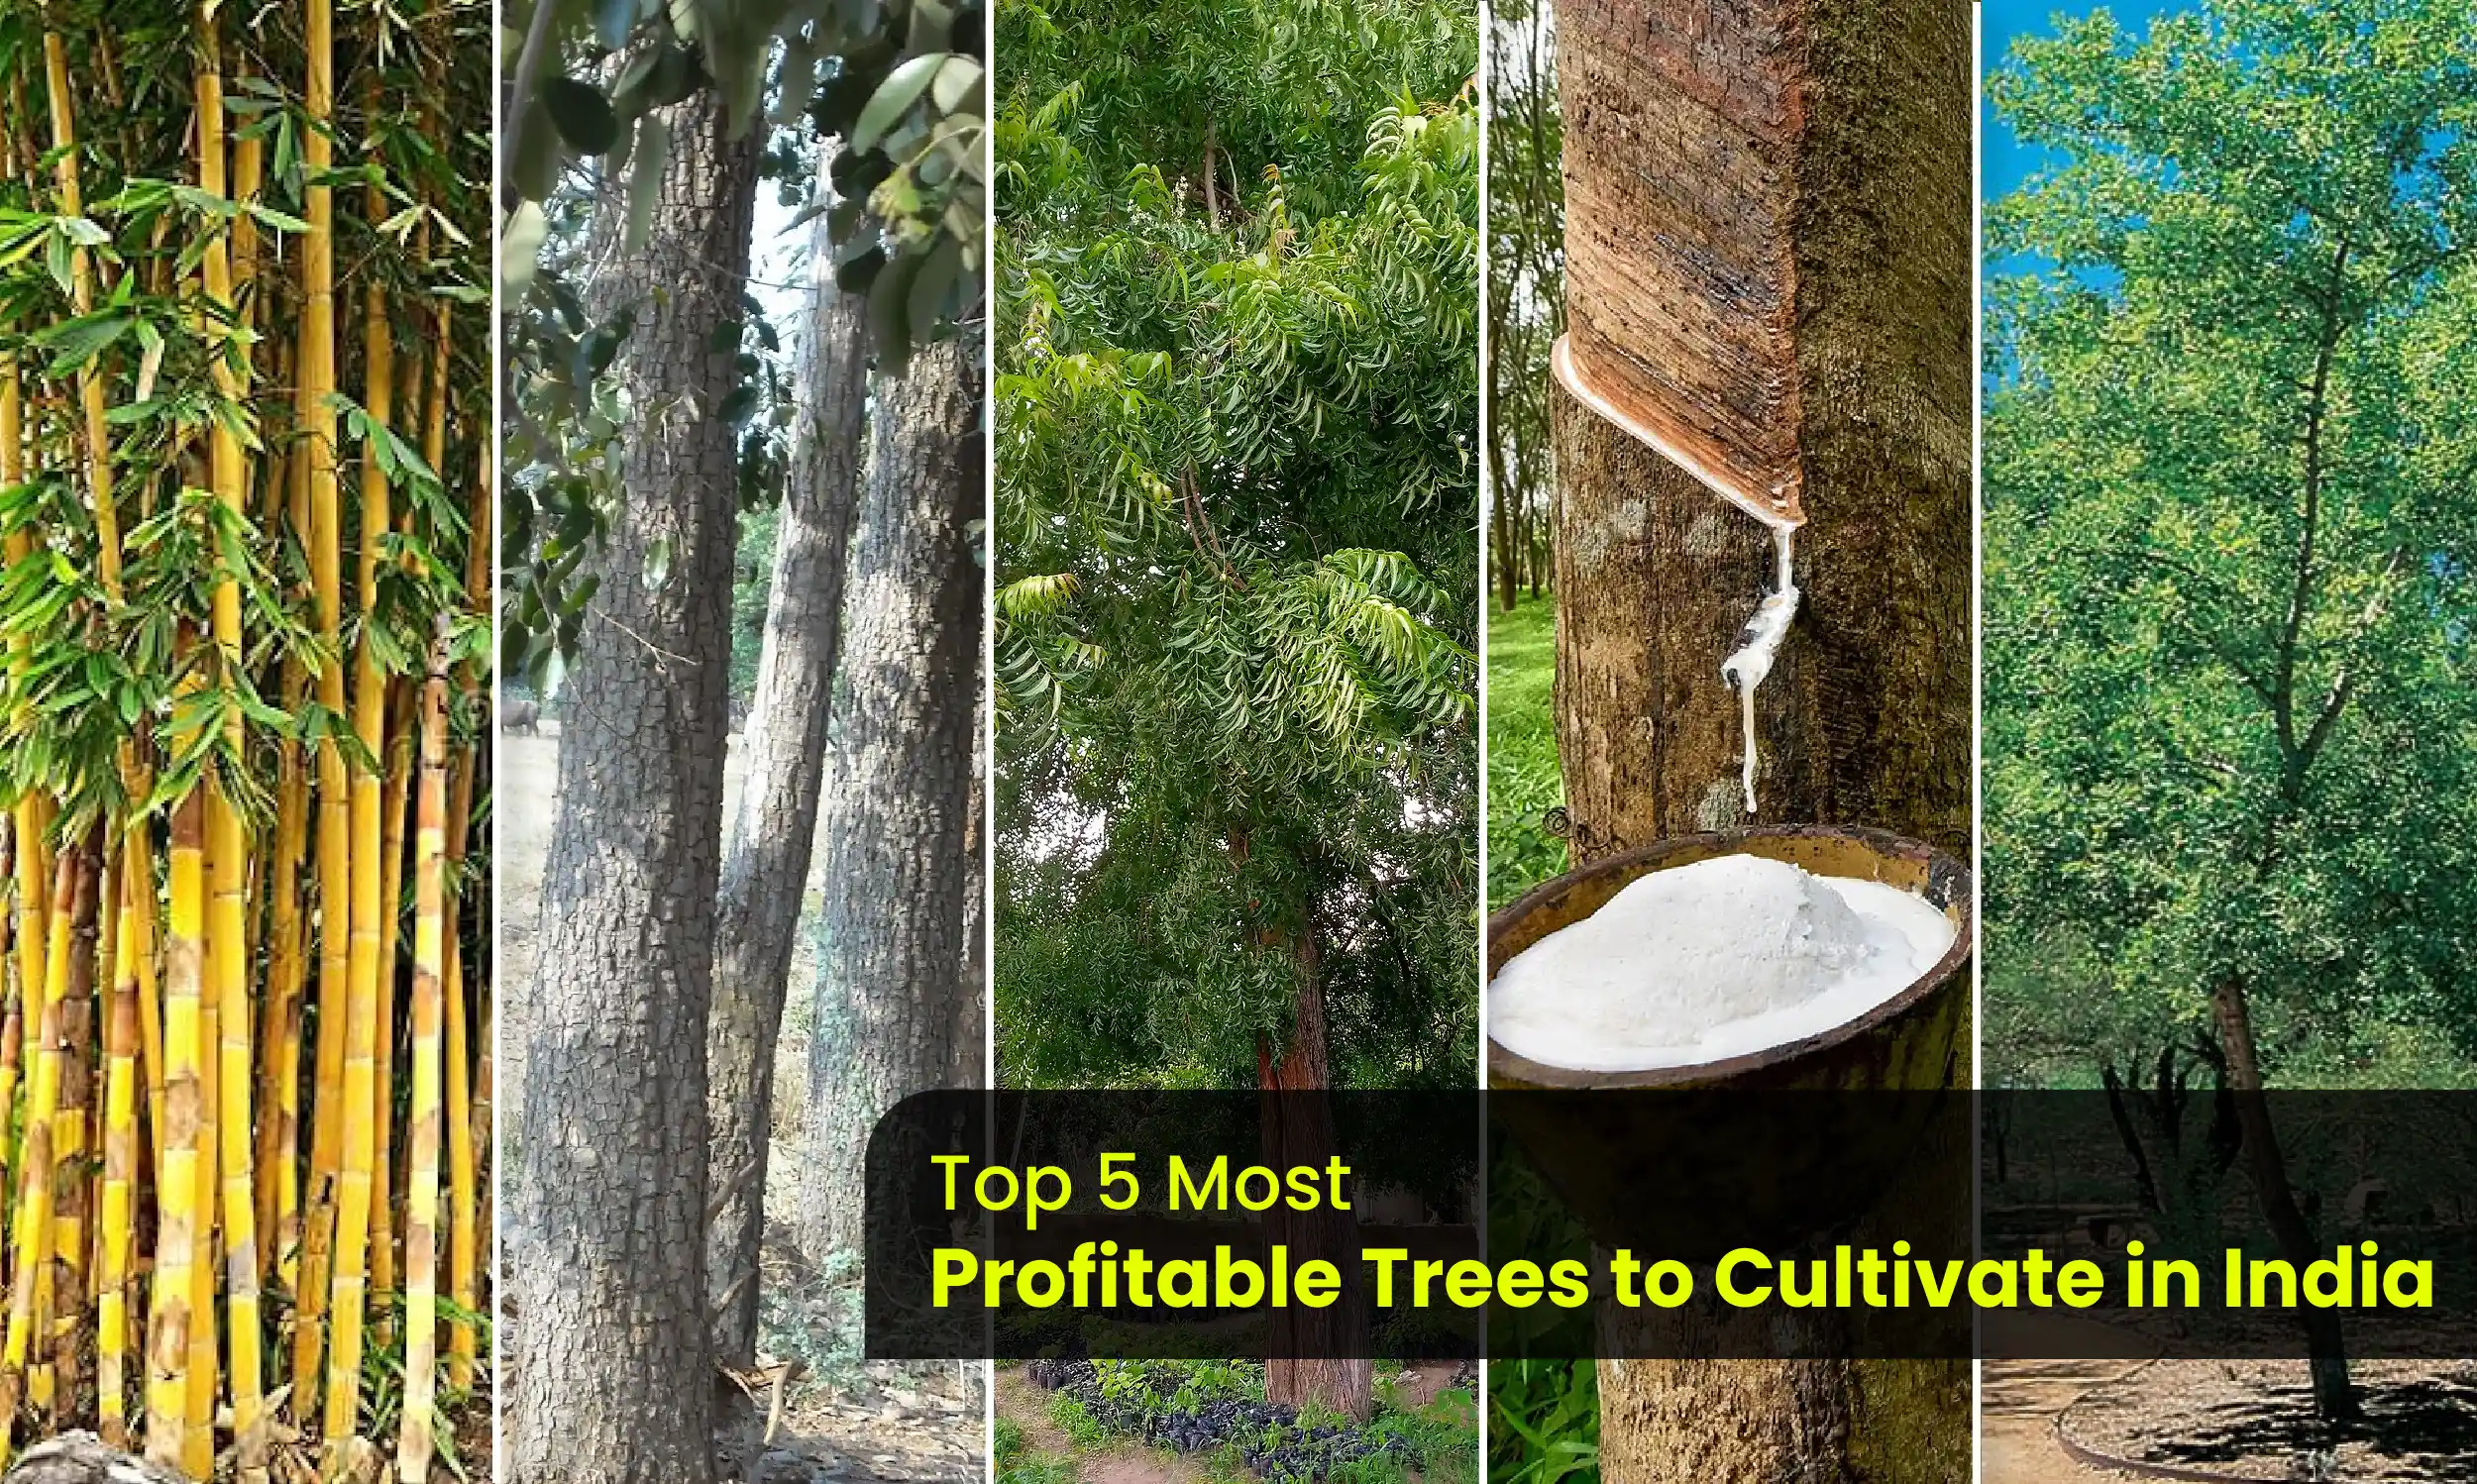 Top 5 Most Profitable Trees to Cultivate in India